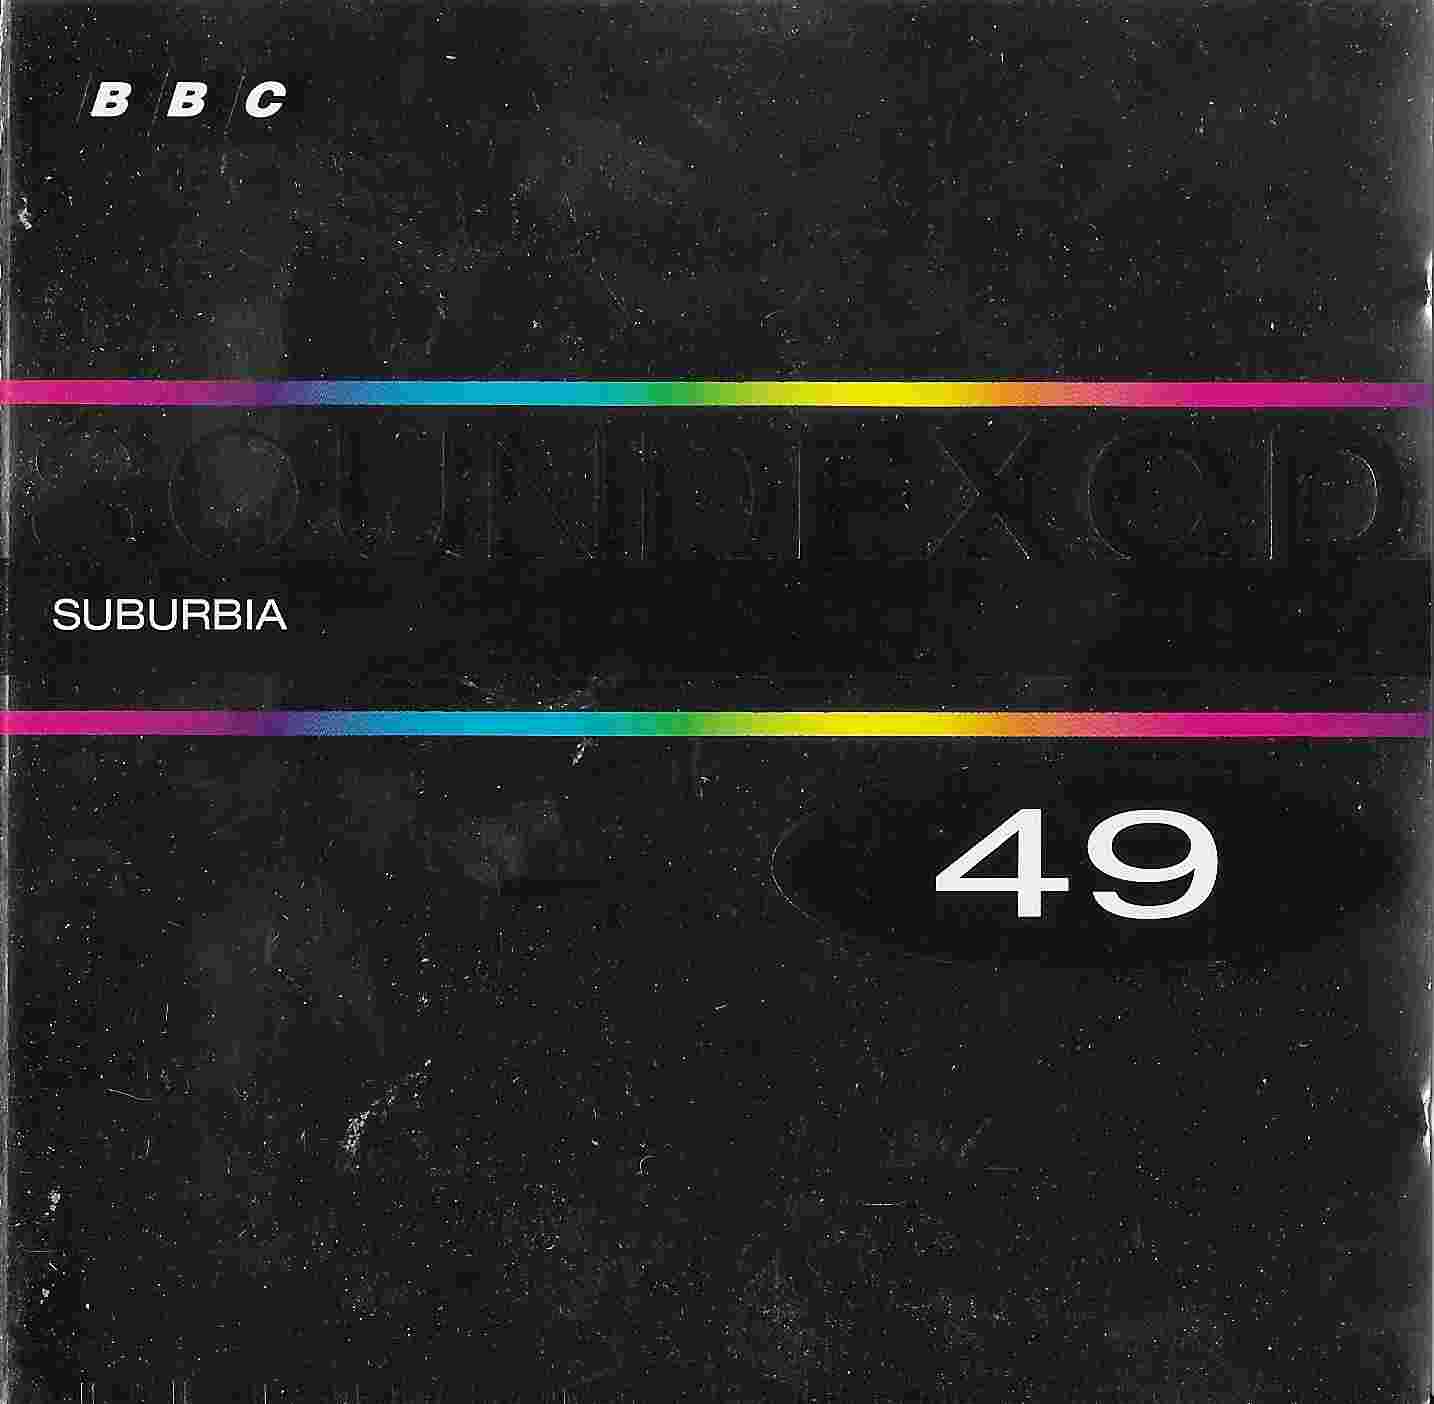 Picture of BBCCD SFX049 Suburbia by artist Various from the BBC cds - Records and Tapes library